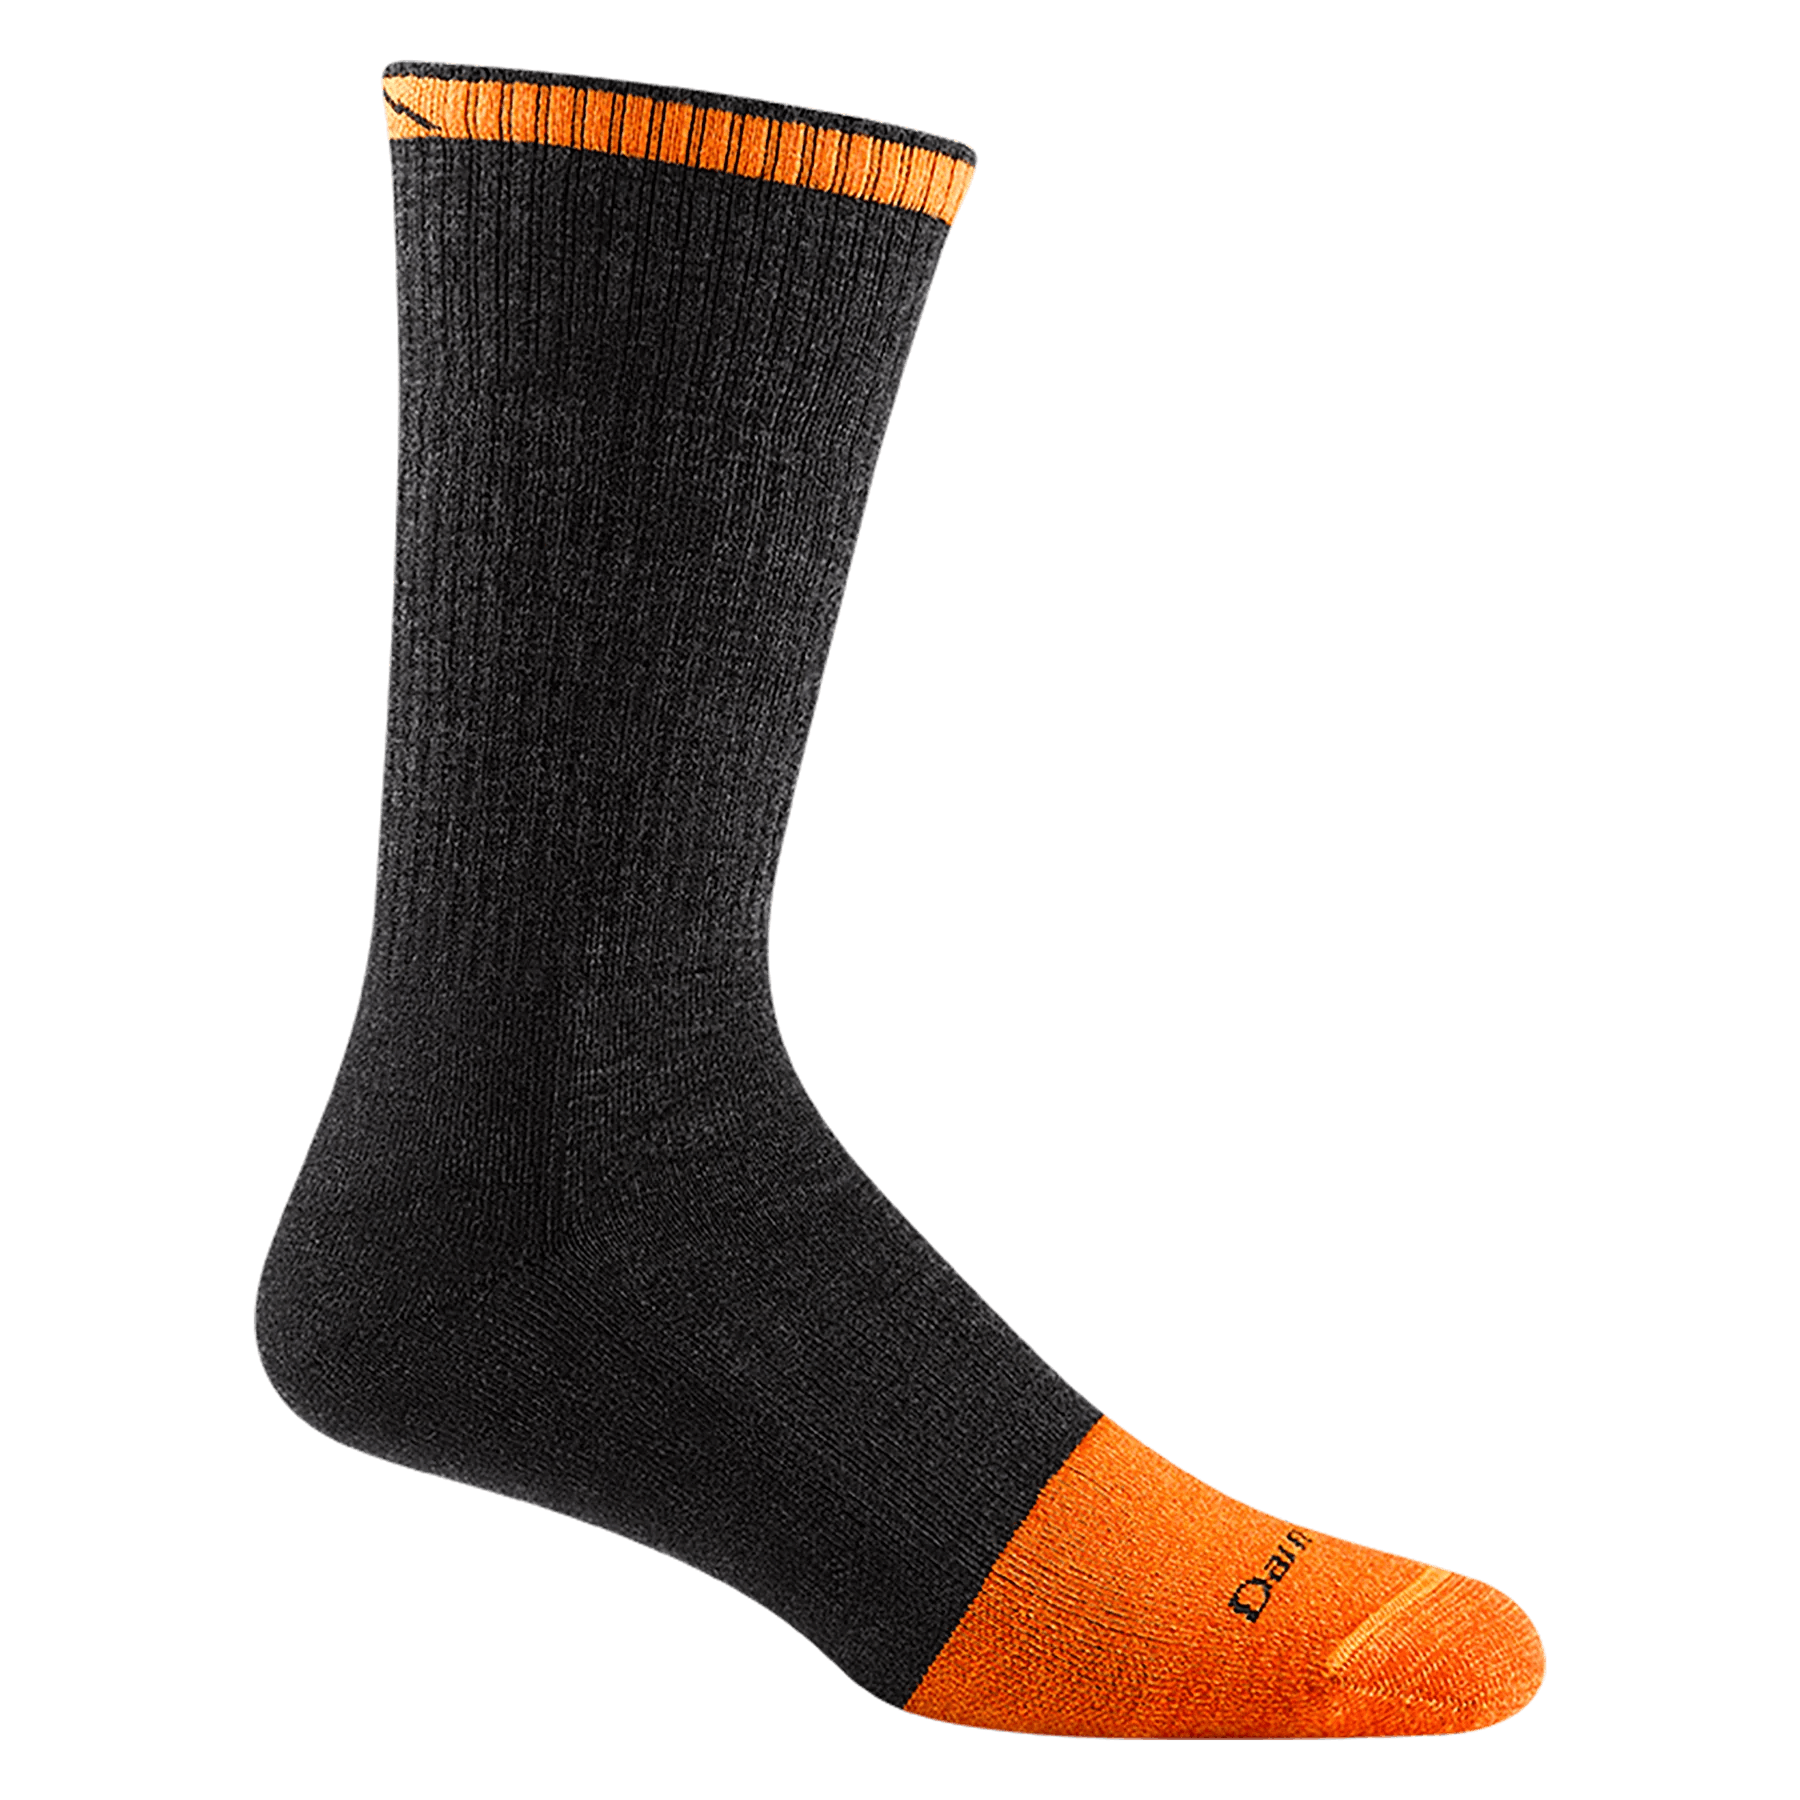 Darn Tough Men's Steely Boot Midweight Work Socks with Full Cushion Toe Box